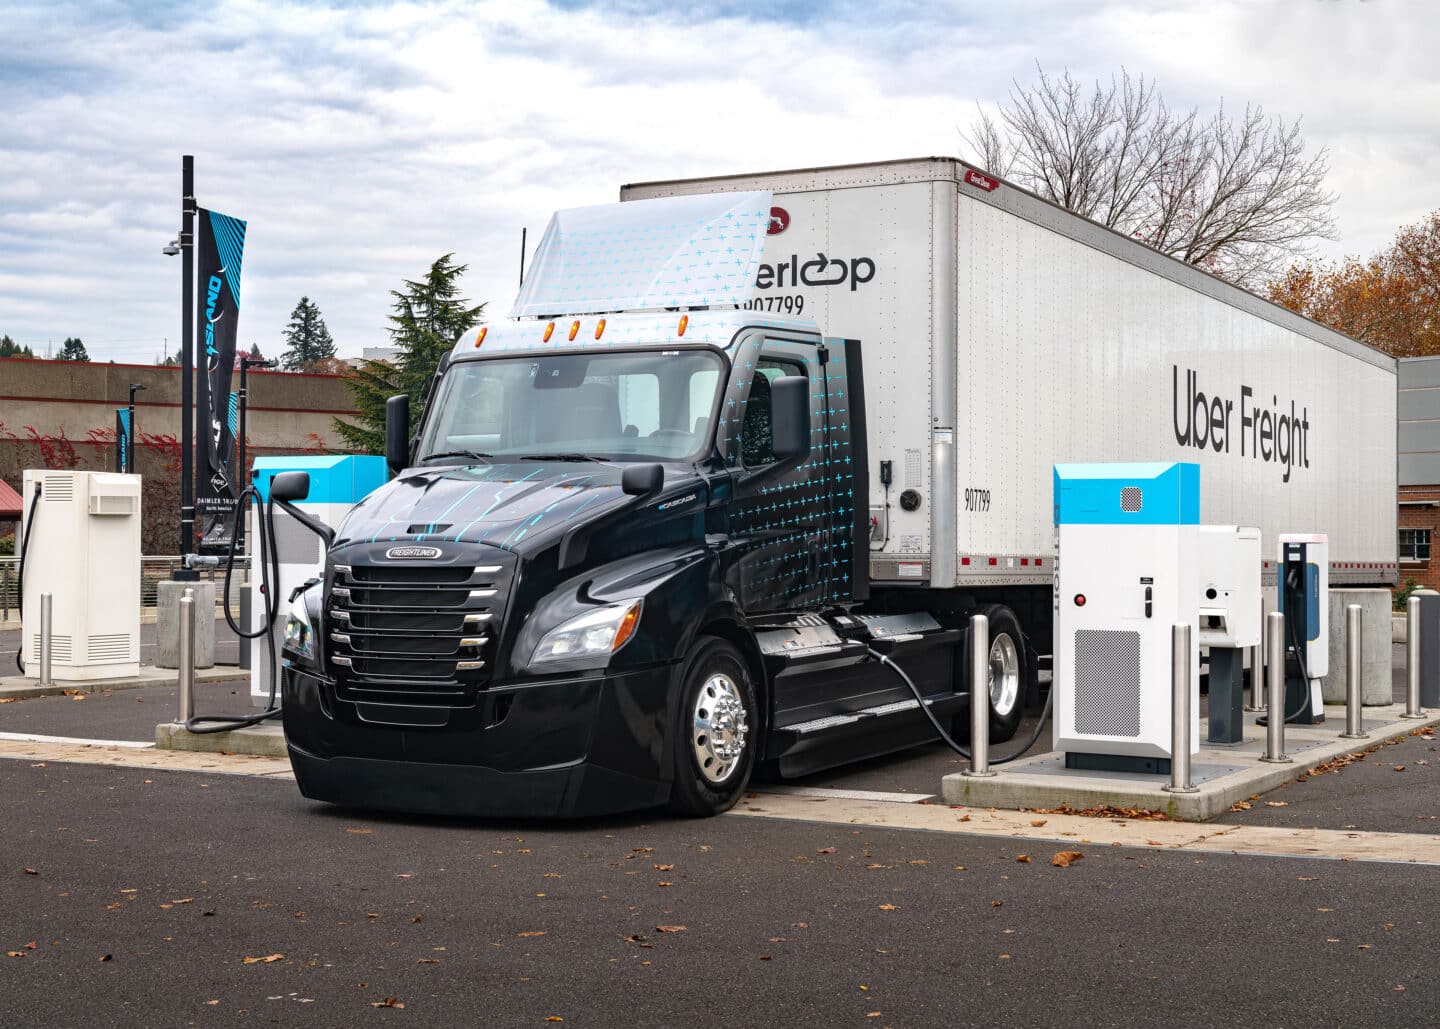 Uber Freight’s new report outlines roadmap for nationwide electric truck deployment